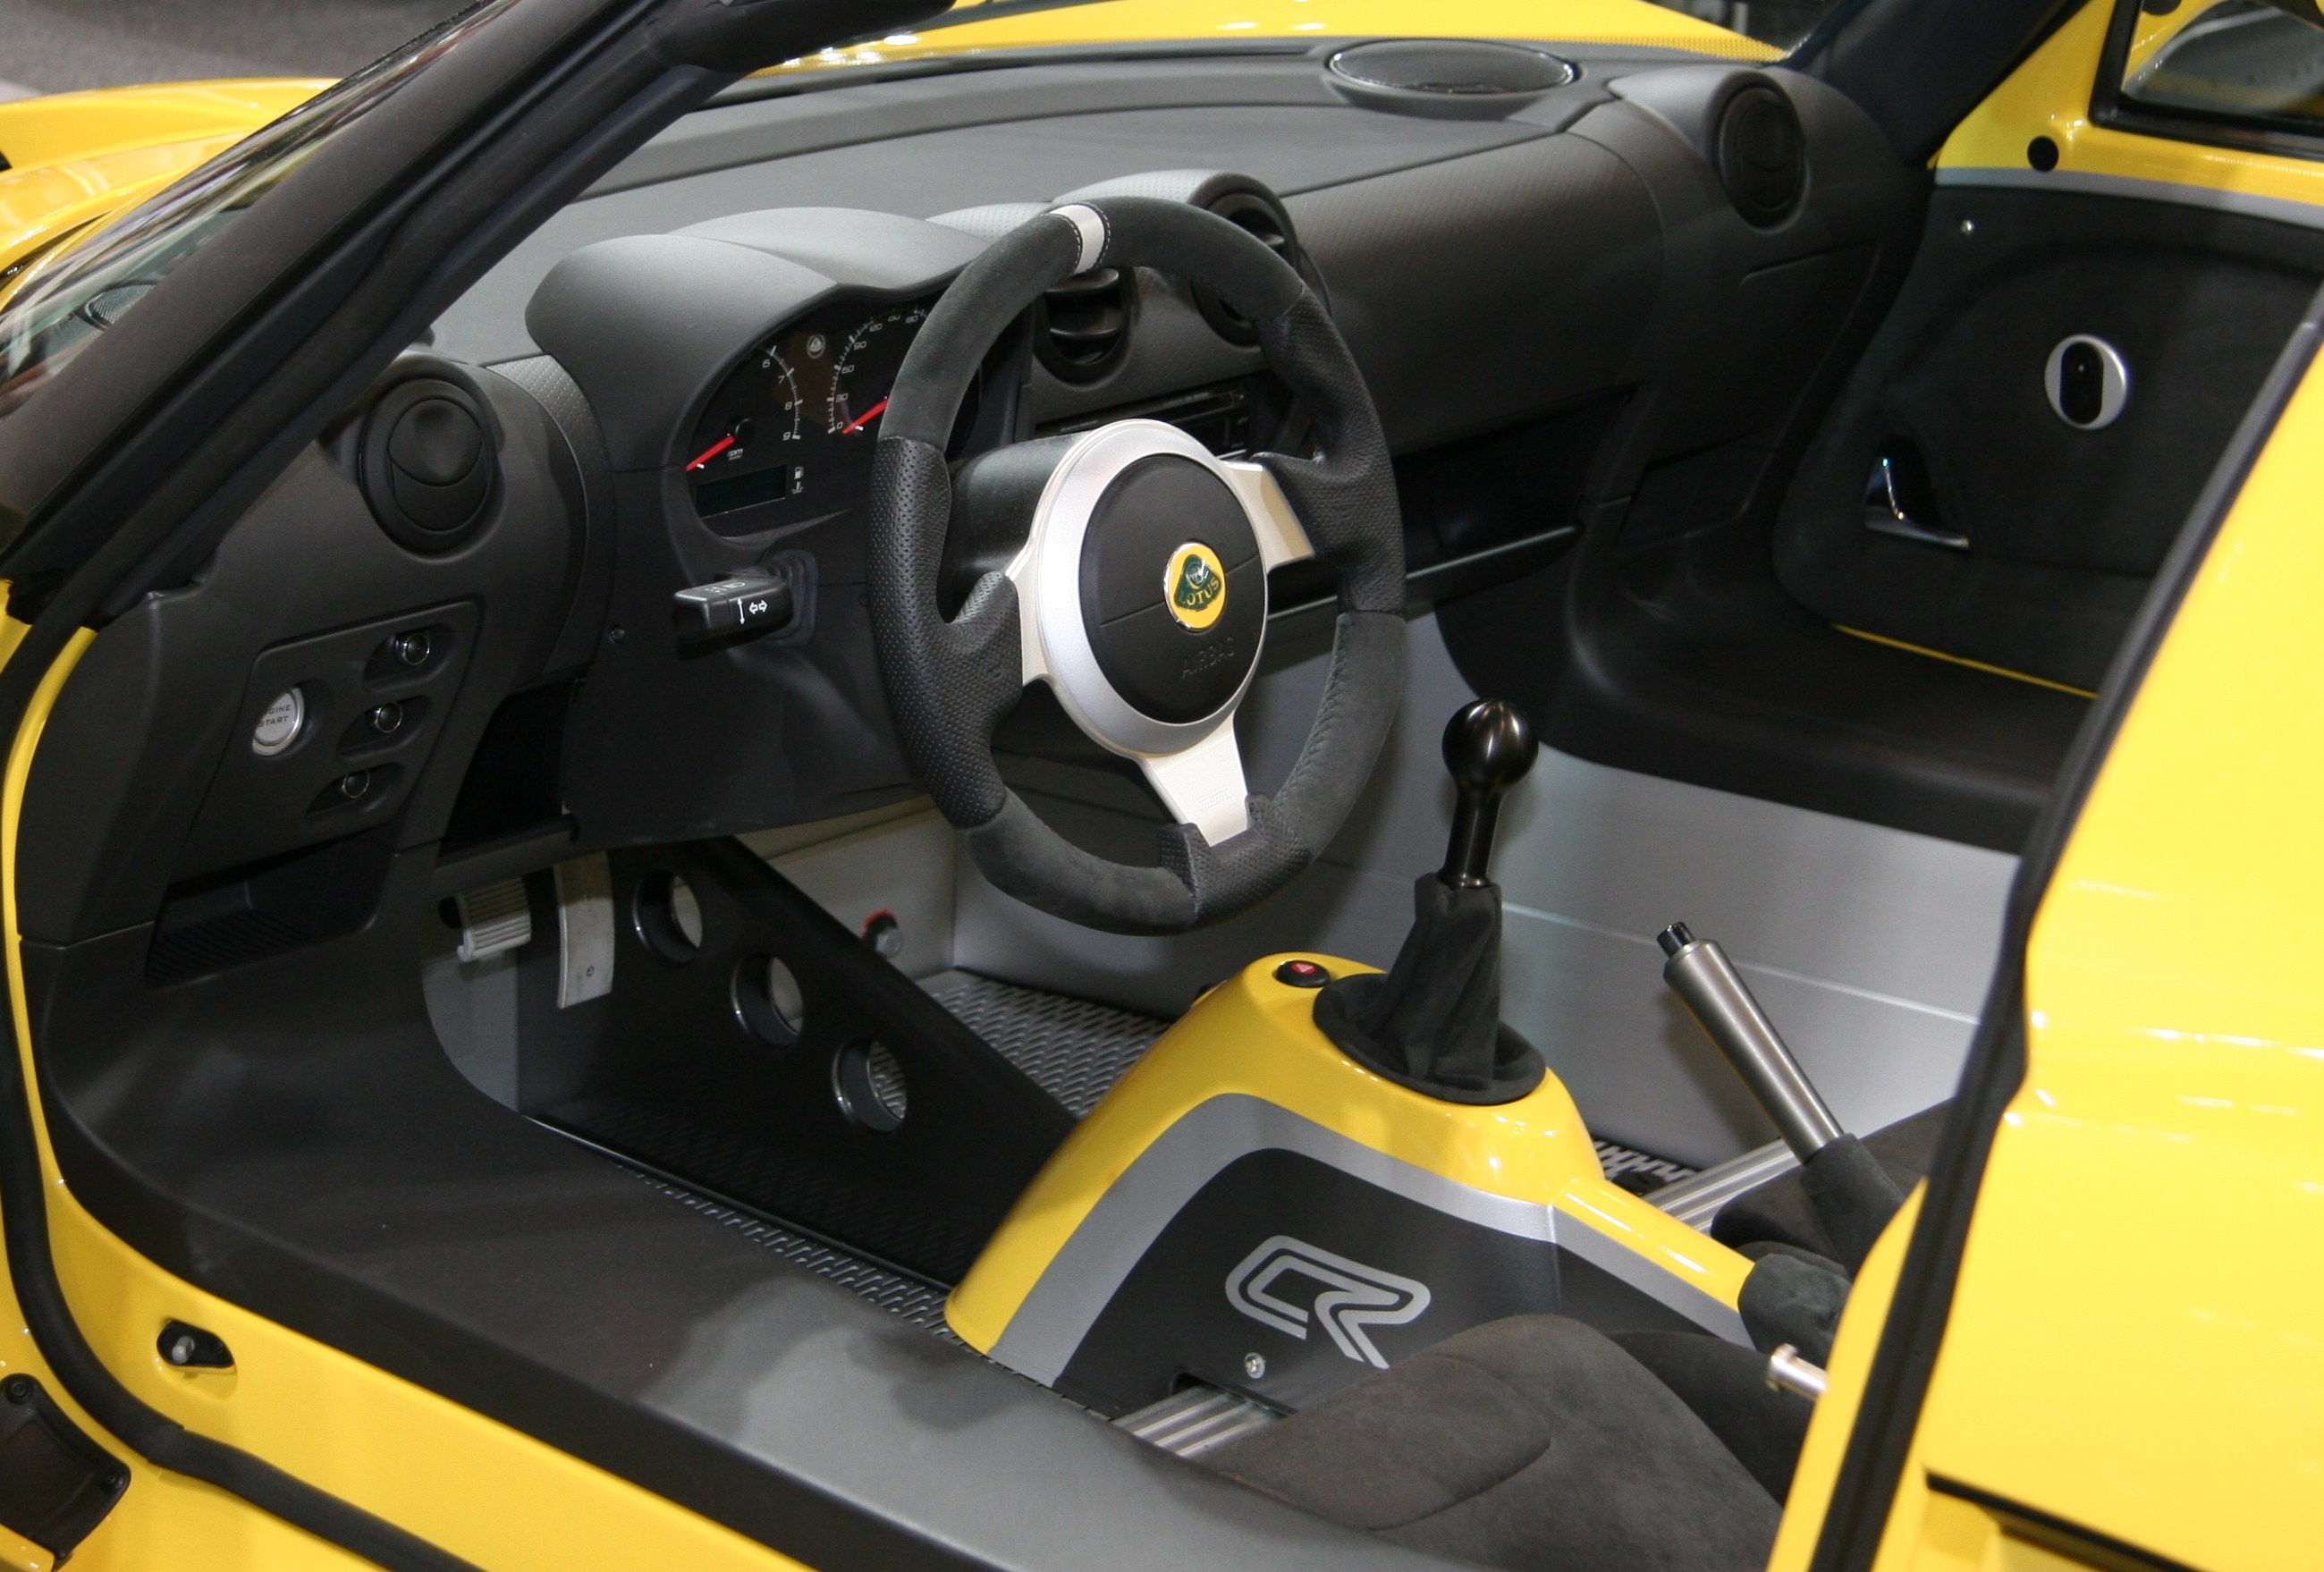 Lotus Elise Interior Cool Things Collection Collthings Co Uk